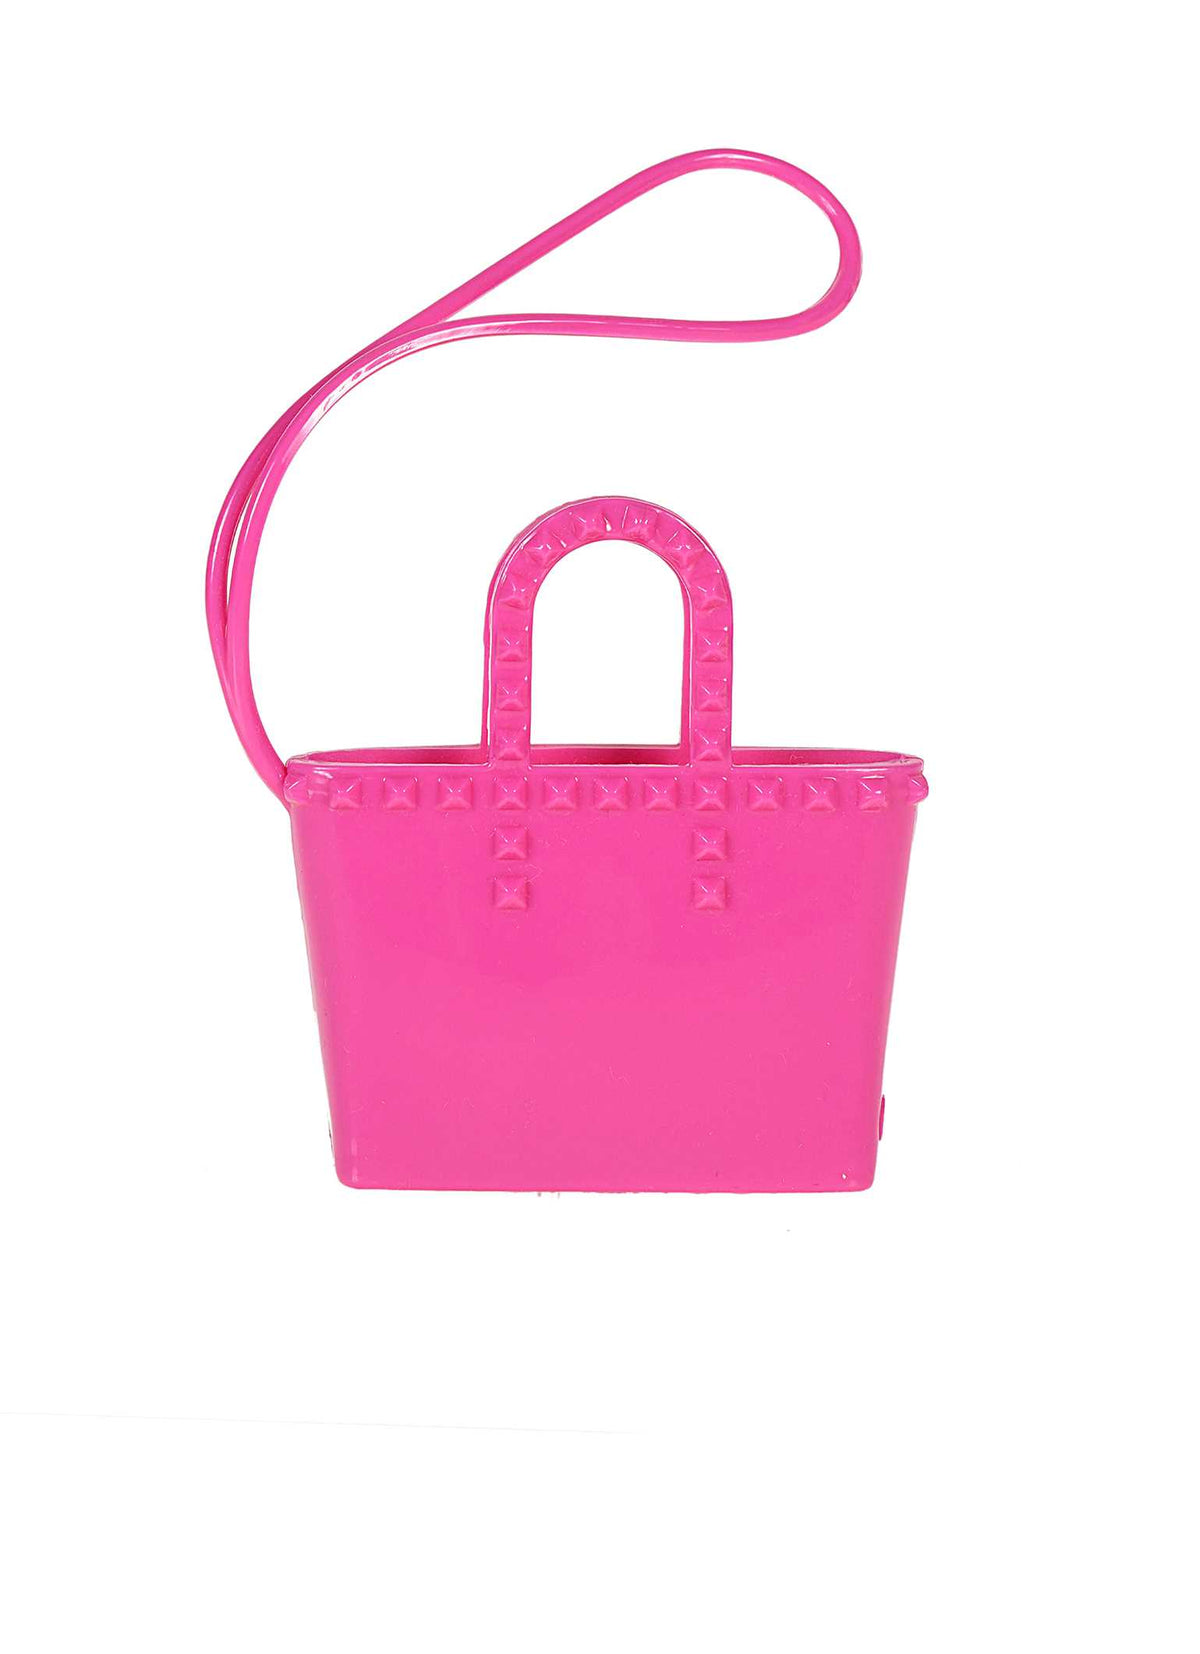 Cute studded mini tote shaped Itsy Bitsy purse charms in color fuchsia